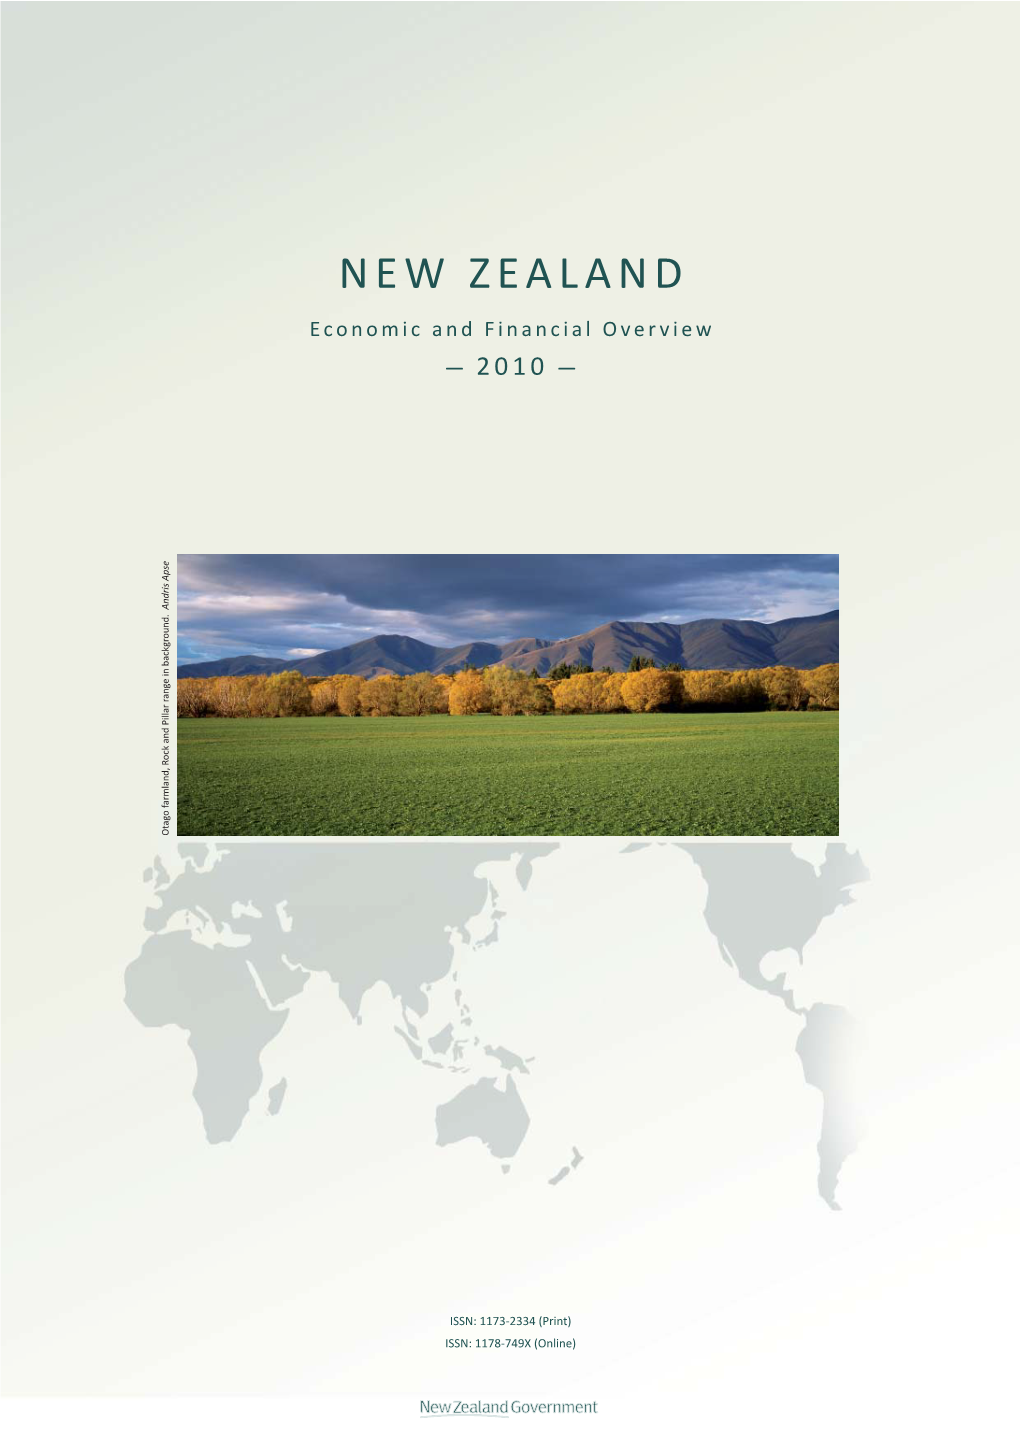 New Zealand Economic and Financial Overview 2010